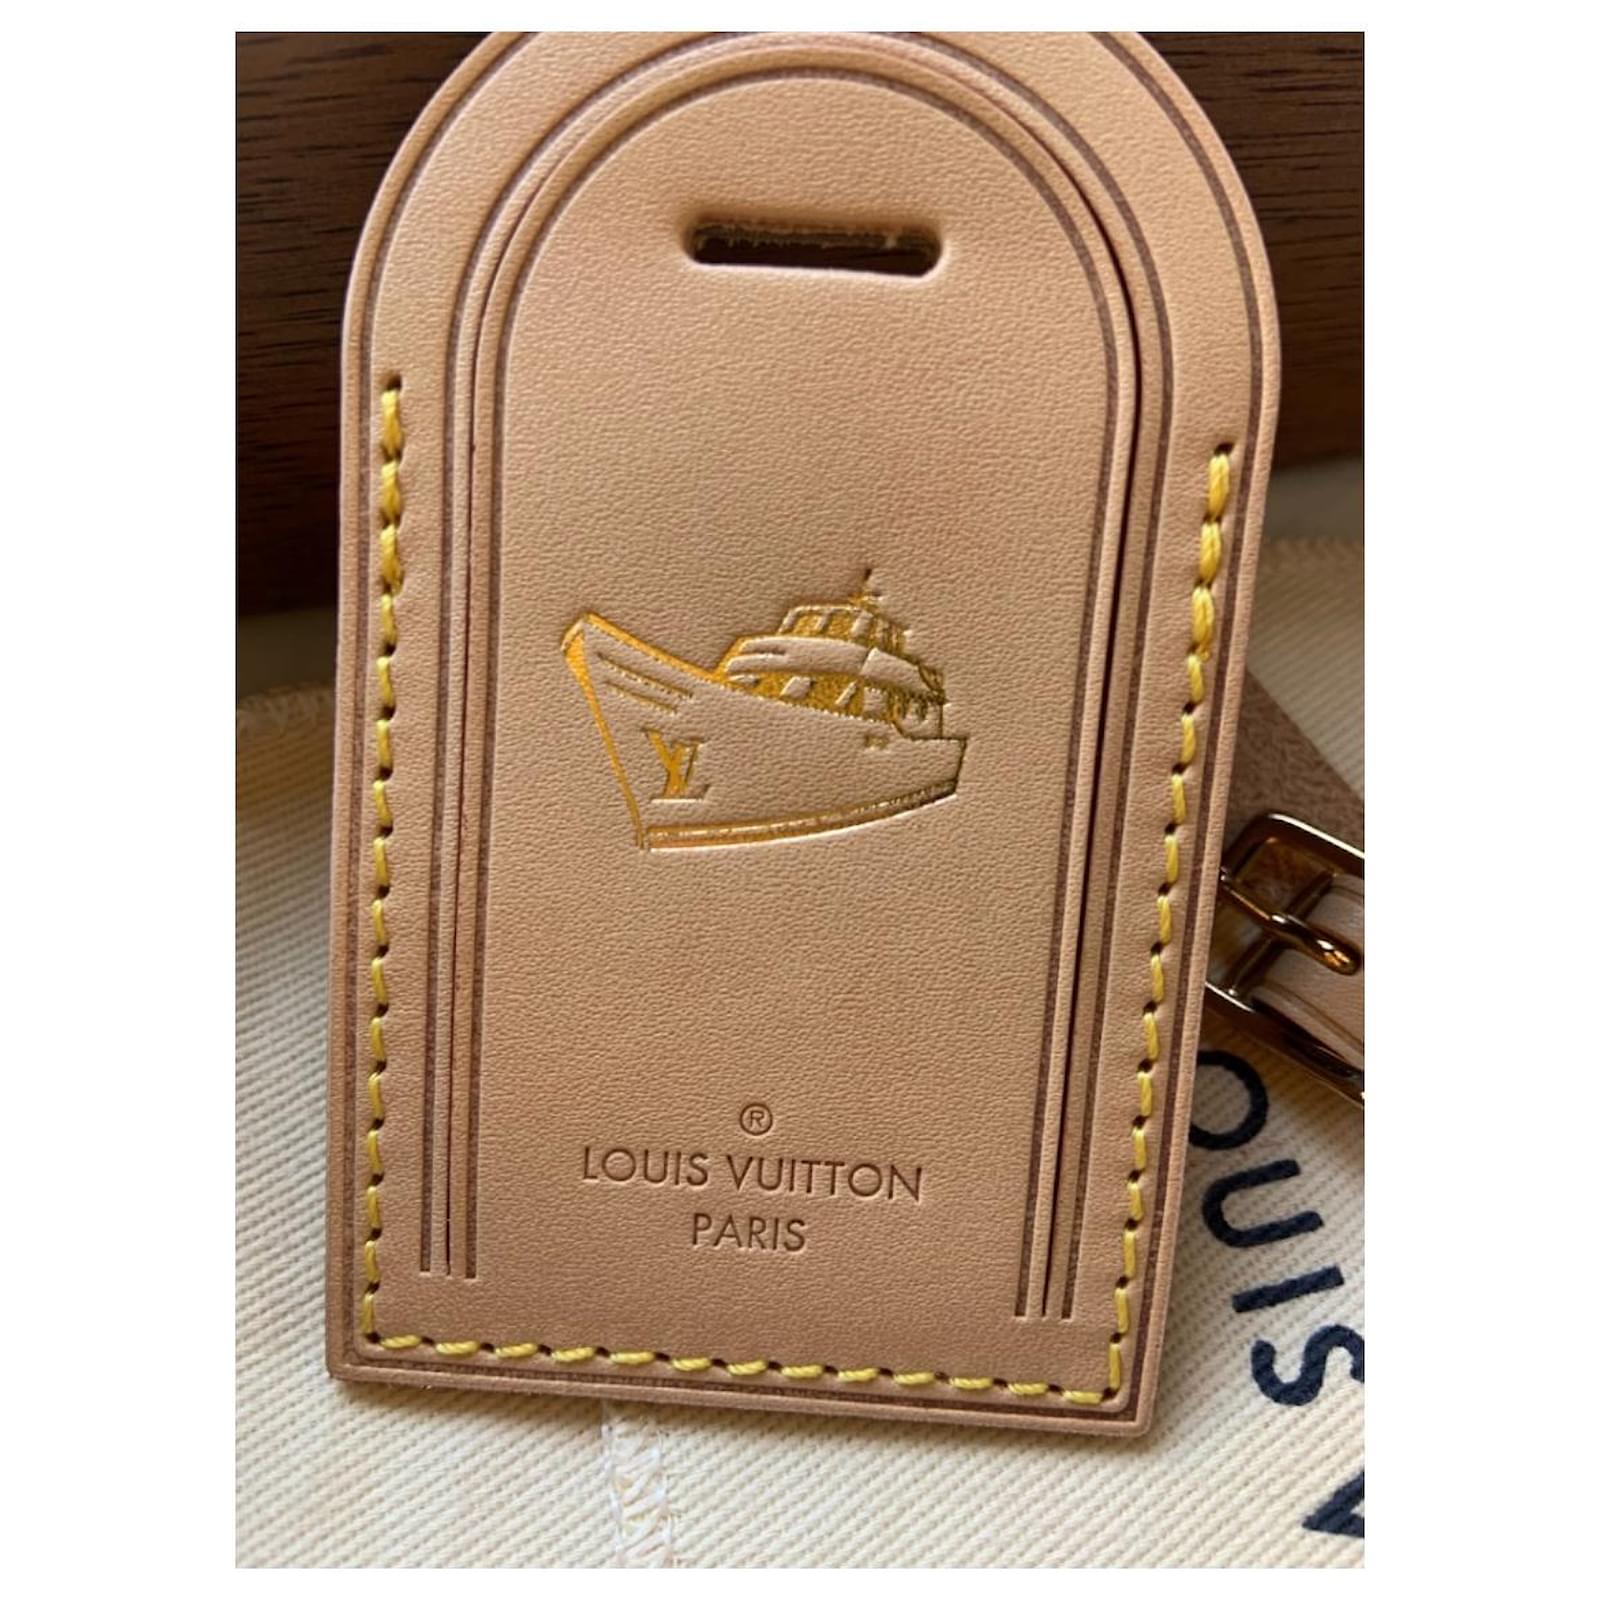 Louis Vuitton Large size vacchetta luggage tag hot stamped Austin